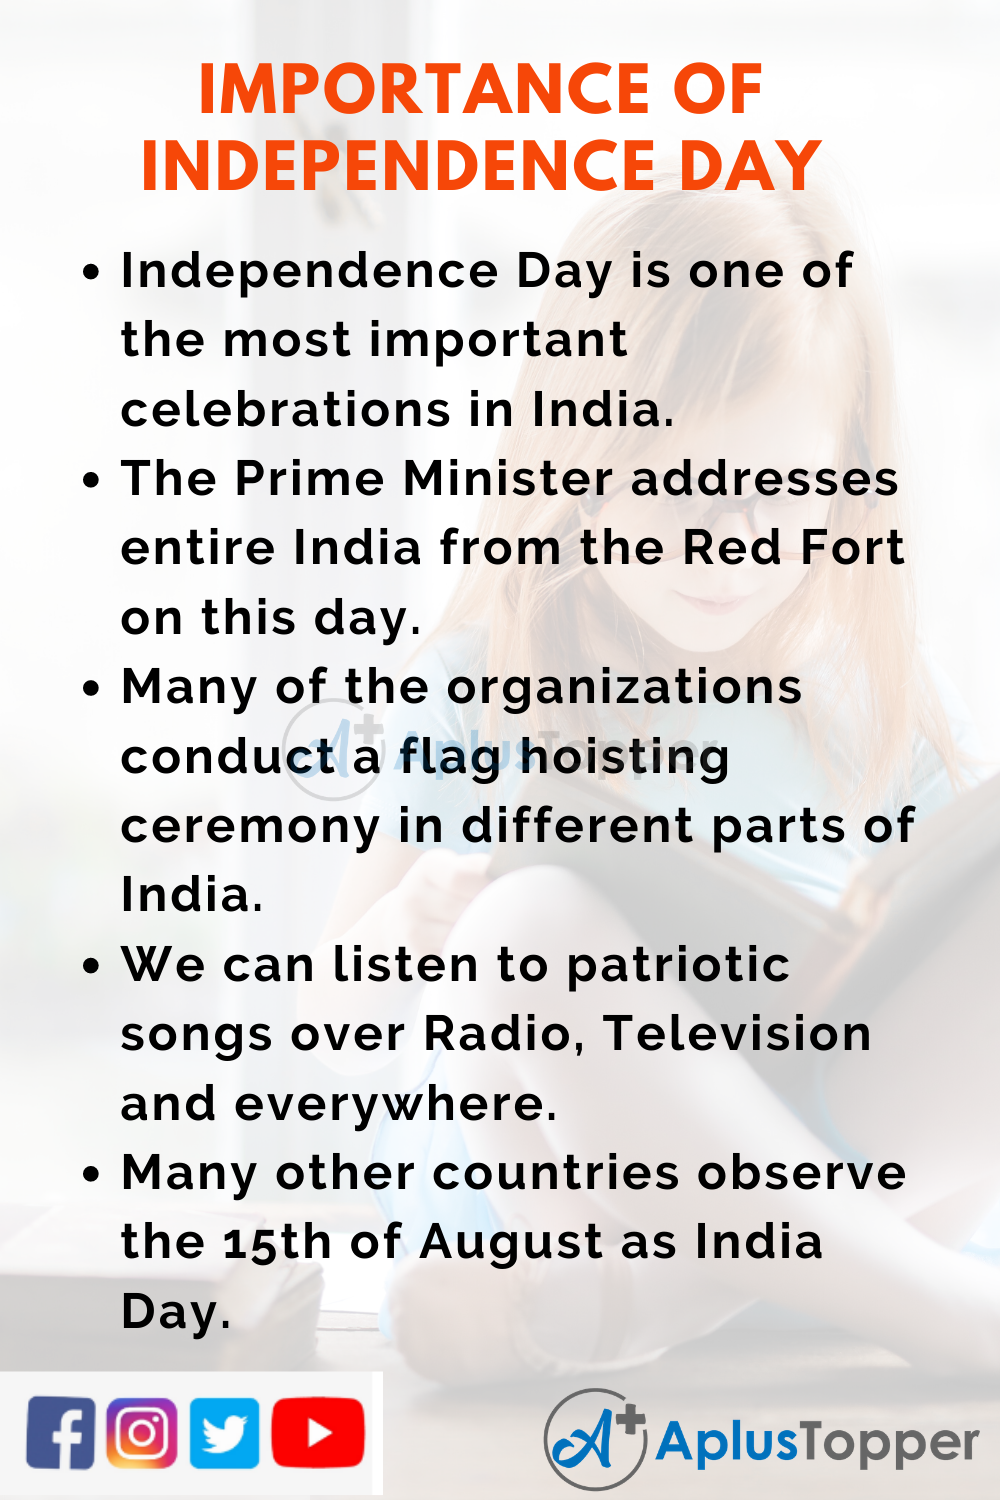 10 Lines on Importance of Independance Day